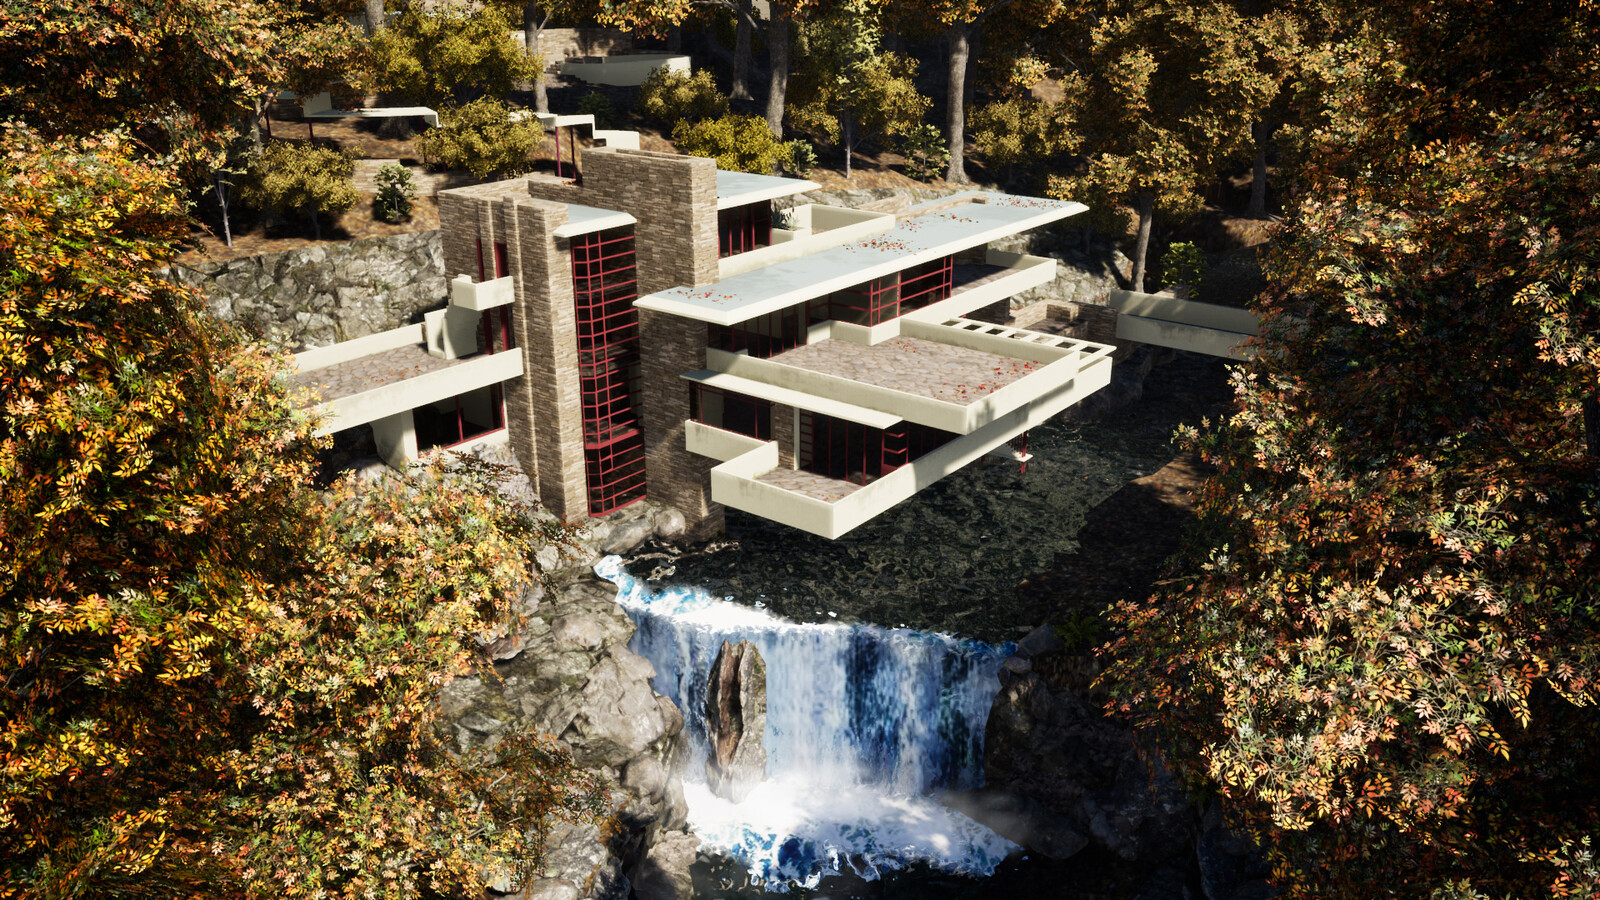 3D rendering of Falling Water House. Edited in Photoshop.